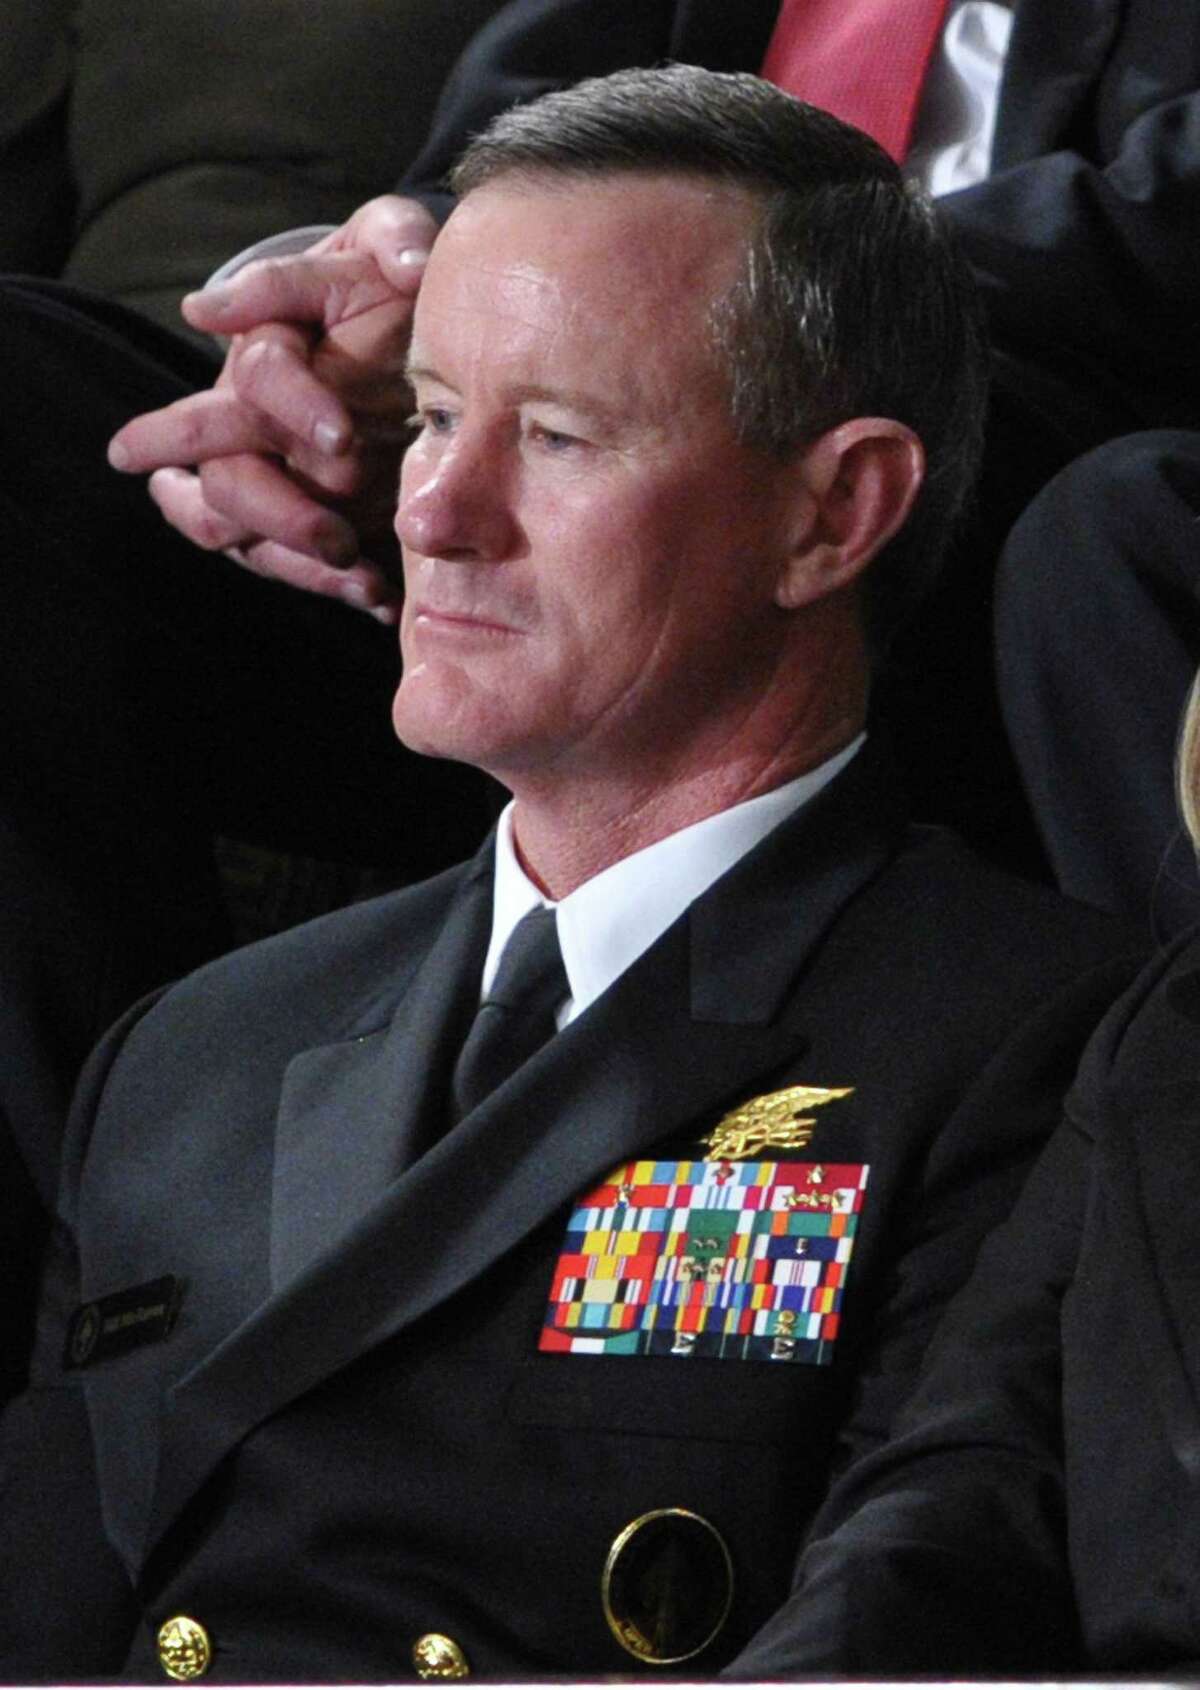 In this file photo taken on January 24, 2012, Admiral William McRaven, commander of the Joint Special Operations Command (JSOC), listens as President Barack Obama delivers his State of the Union address before a joint session of Congress on Capitol Hill in Washington, DC.